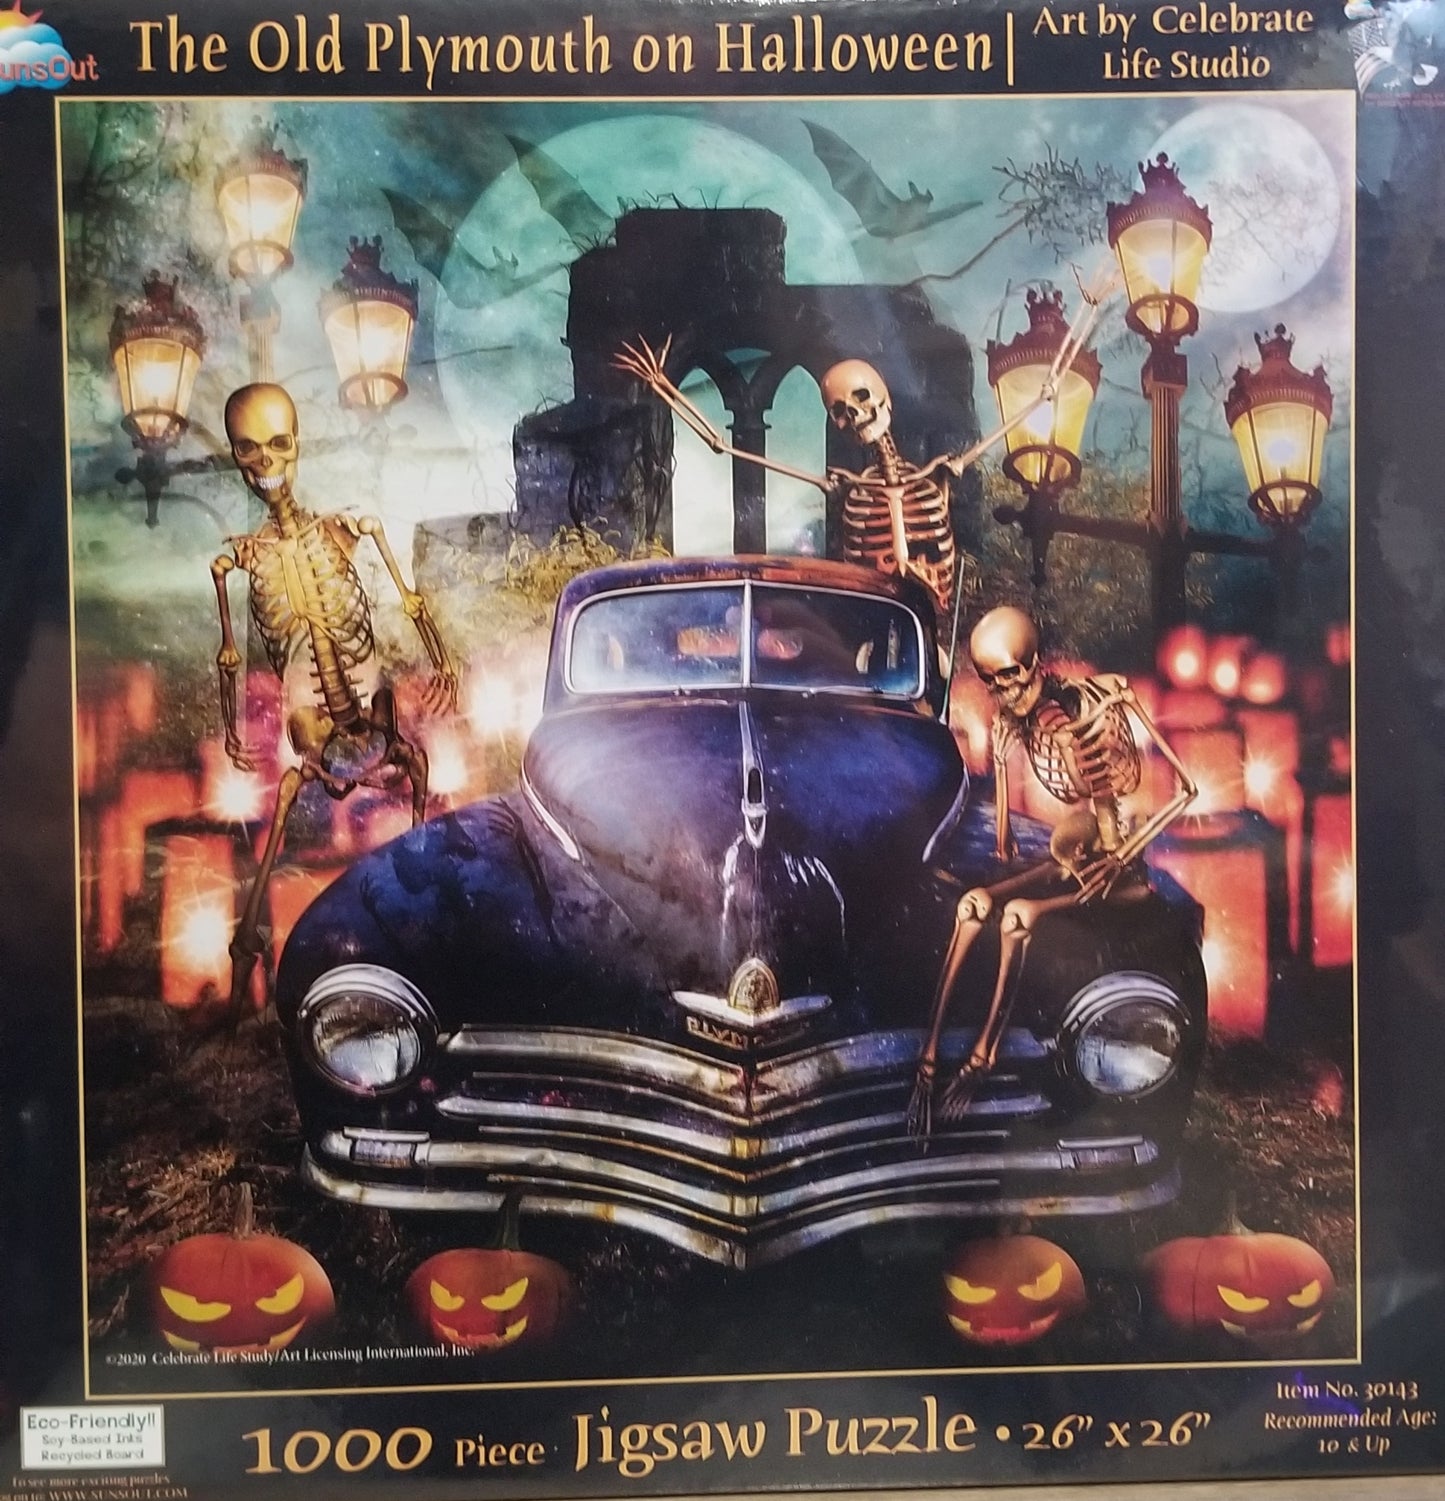 The Old Plymouth on Halloween by Celebrate art Studio, 1000 Piece Puzzle